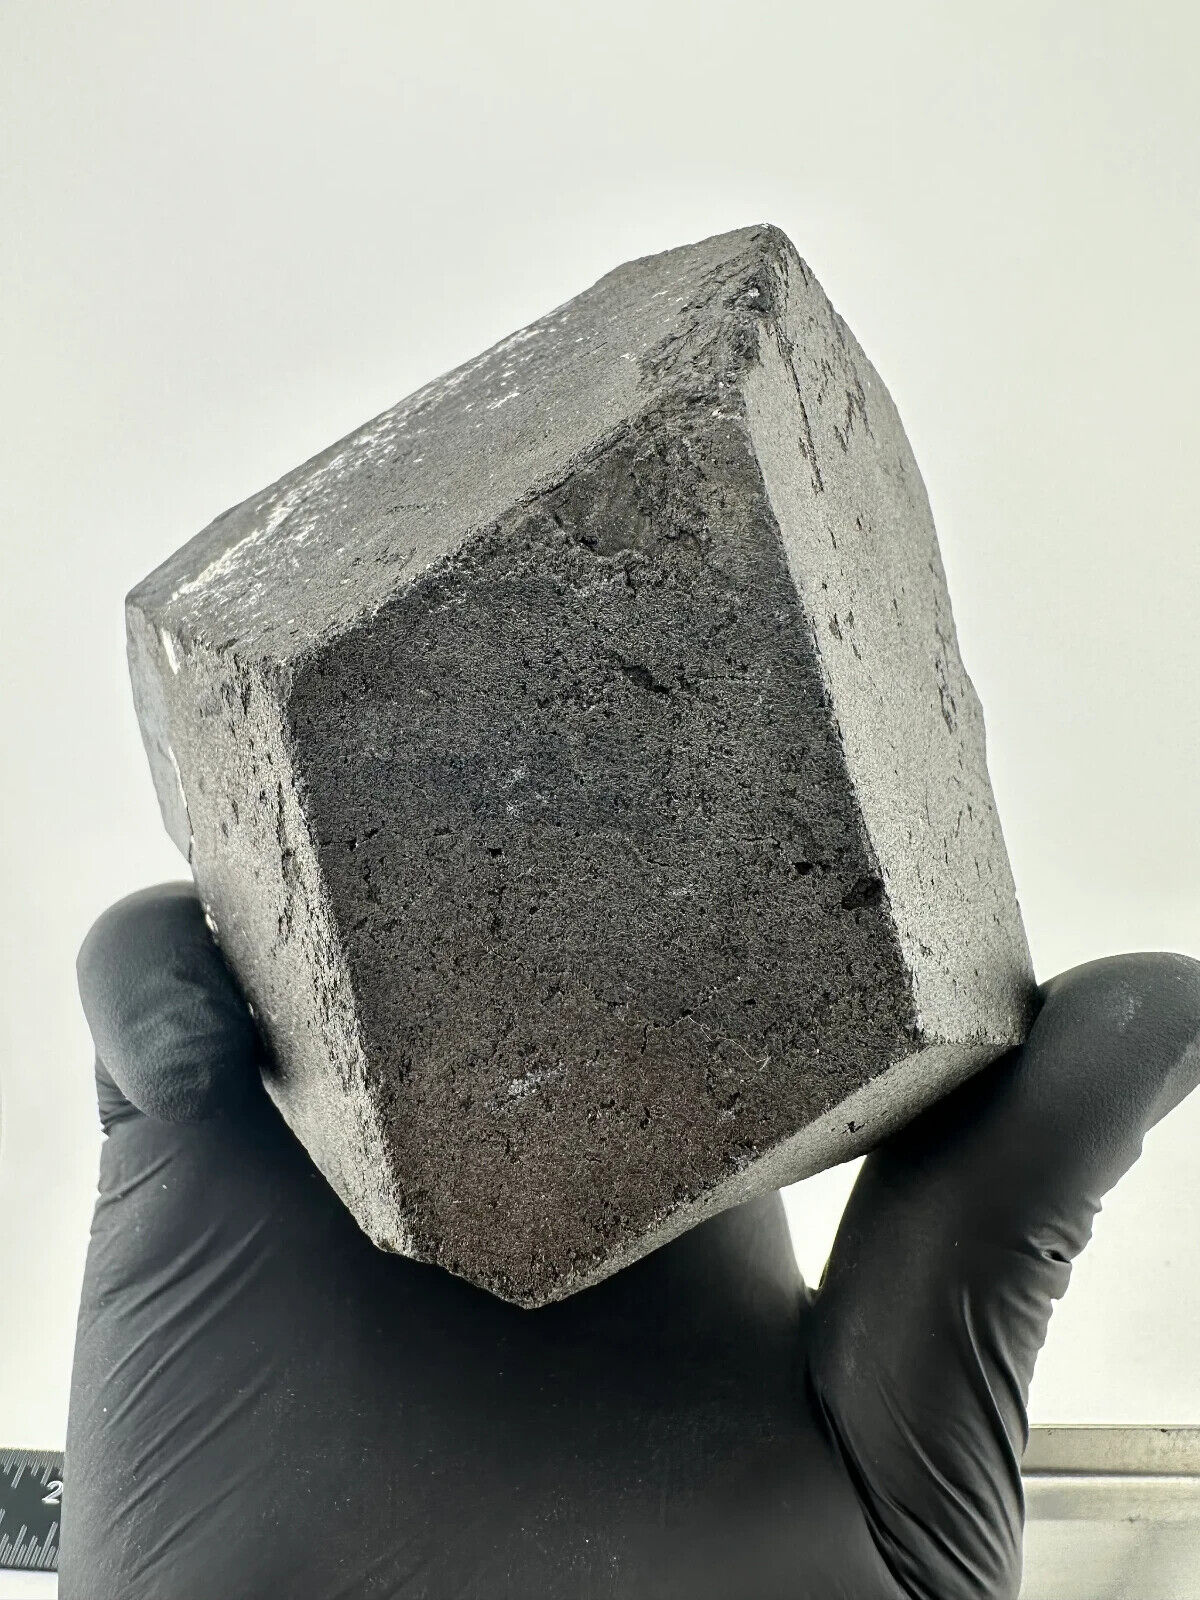 RARE Museum Quality Massive Dodecahedral Magnetite Crystal-Collector's Specimen